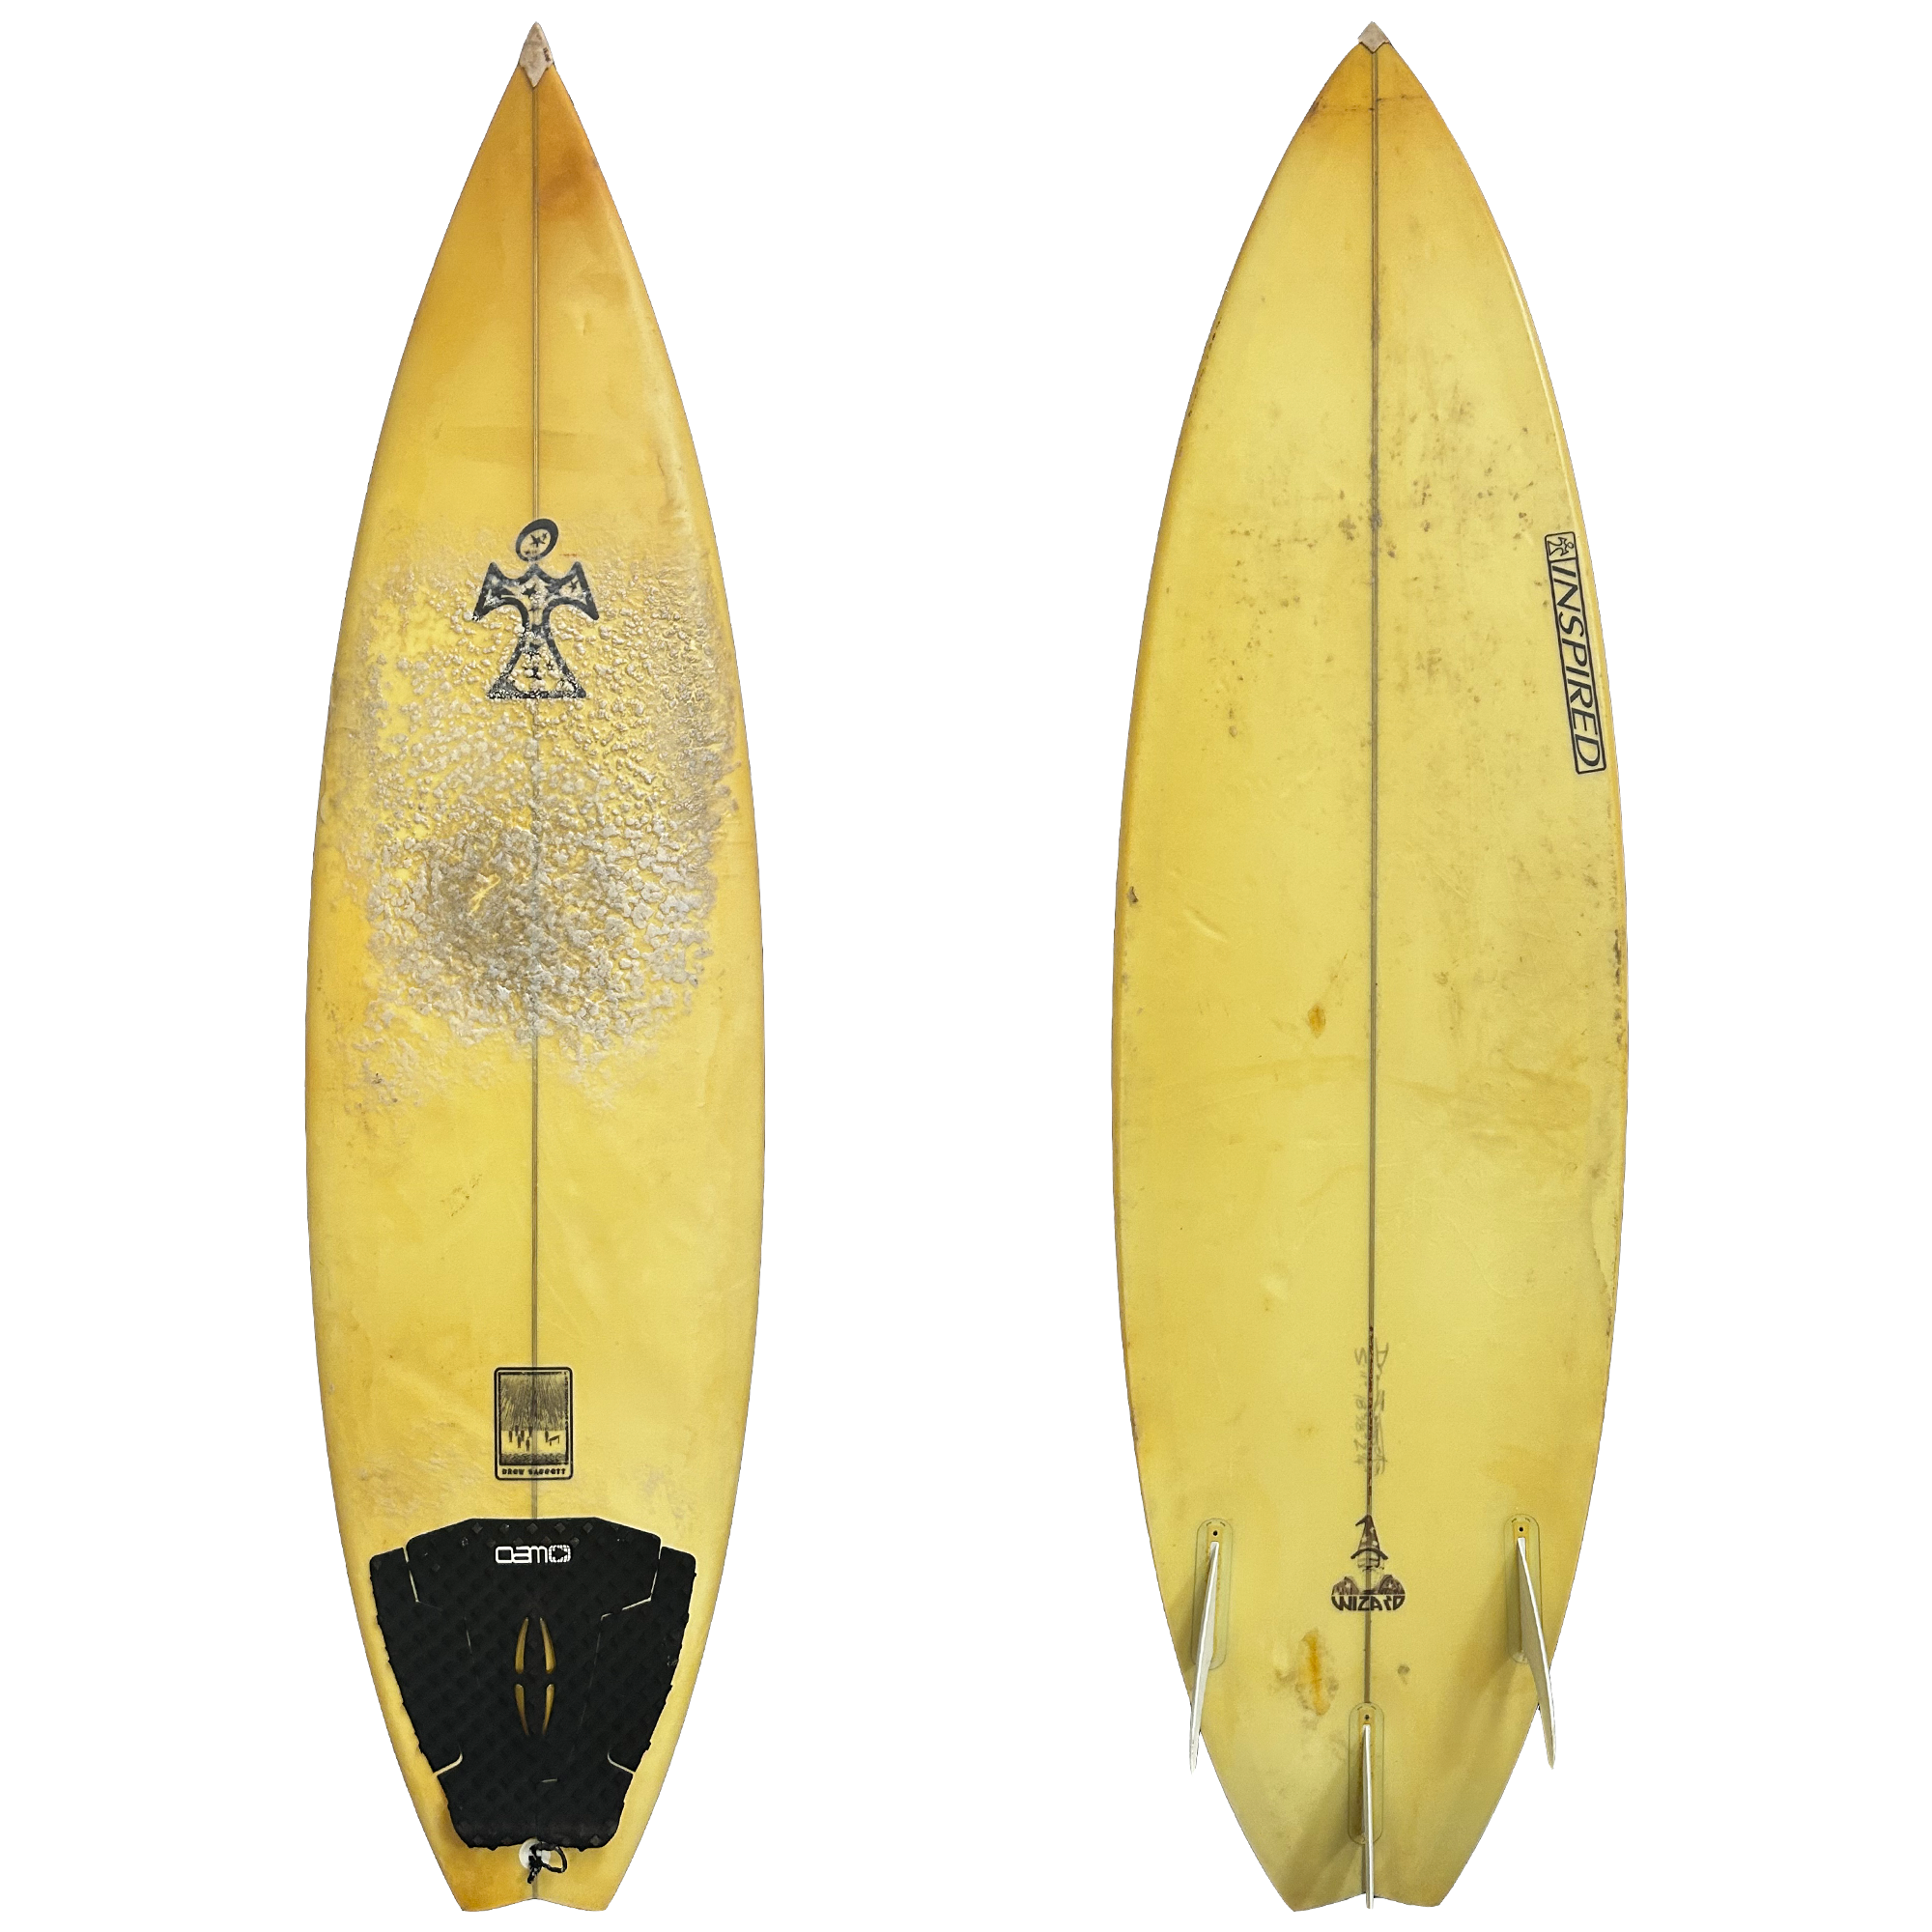 Inspired Wizard 5'11 Consignment Surfboard